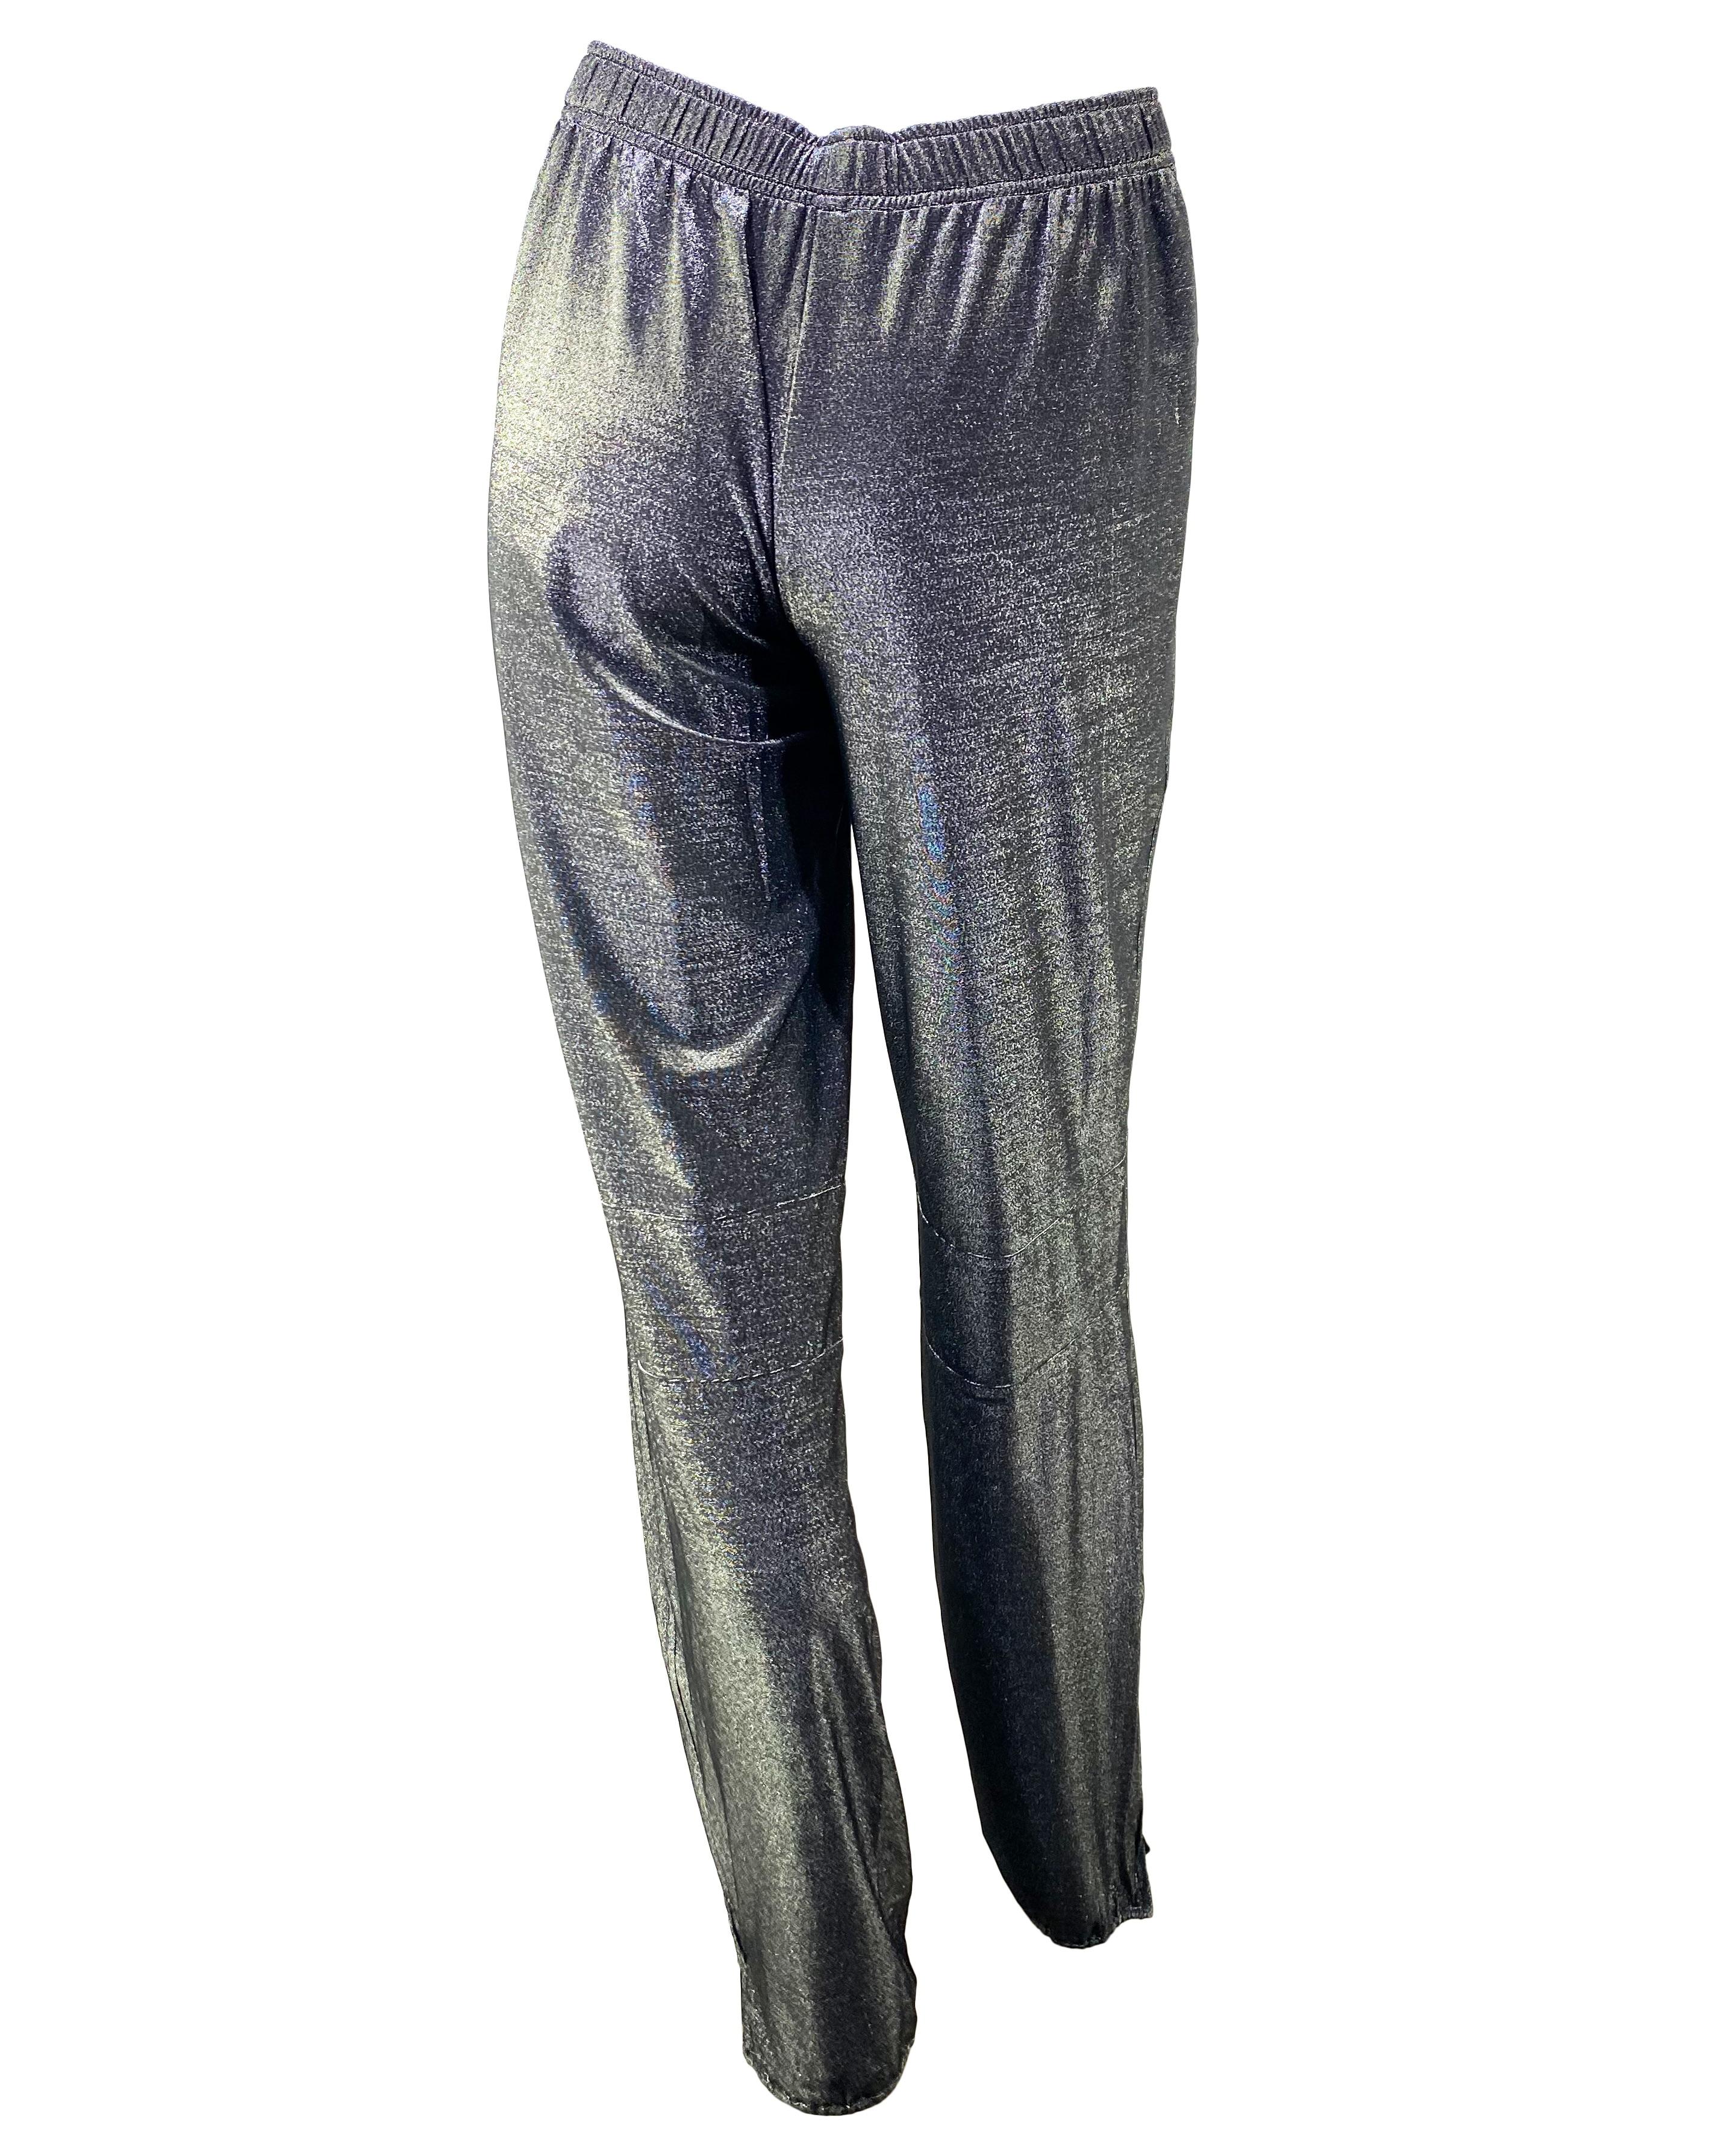 S/S 2000 Gucci by Tom Ford Silver Grey Metallic Elasticized Buckle Pants In Excellent Condition In West Hollywood, CA